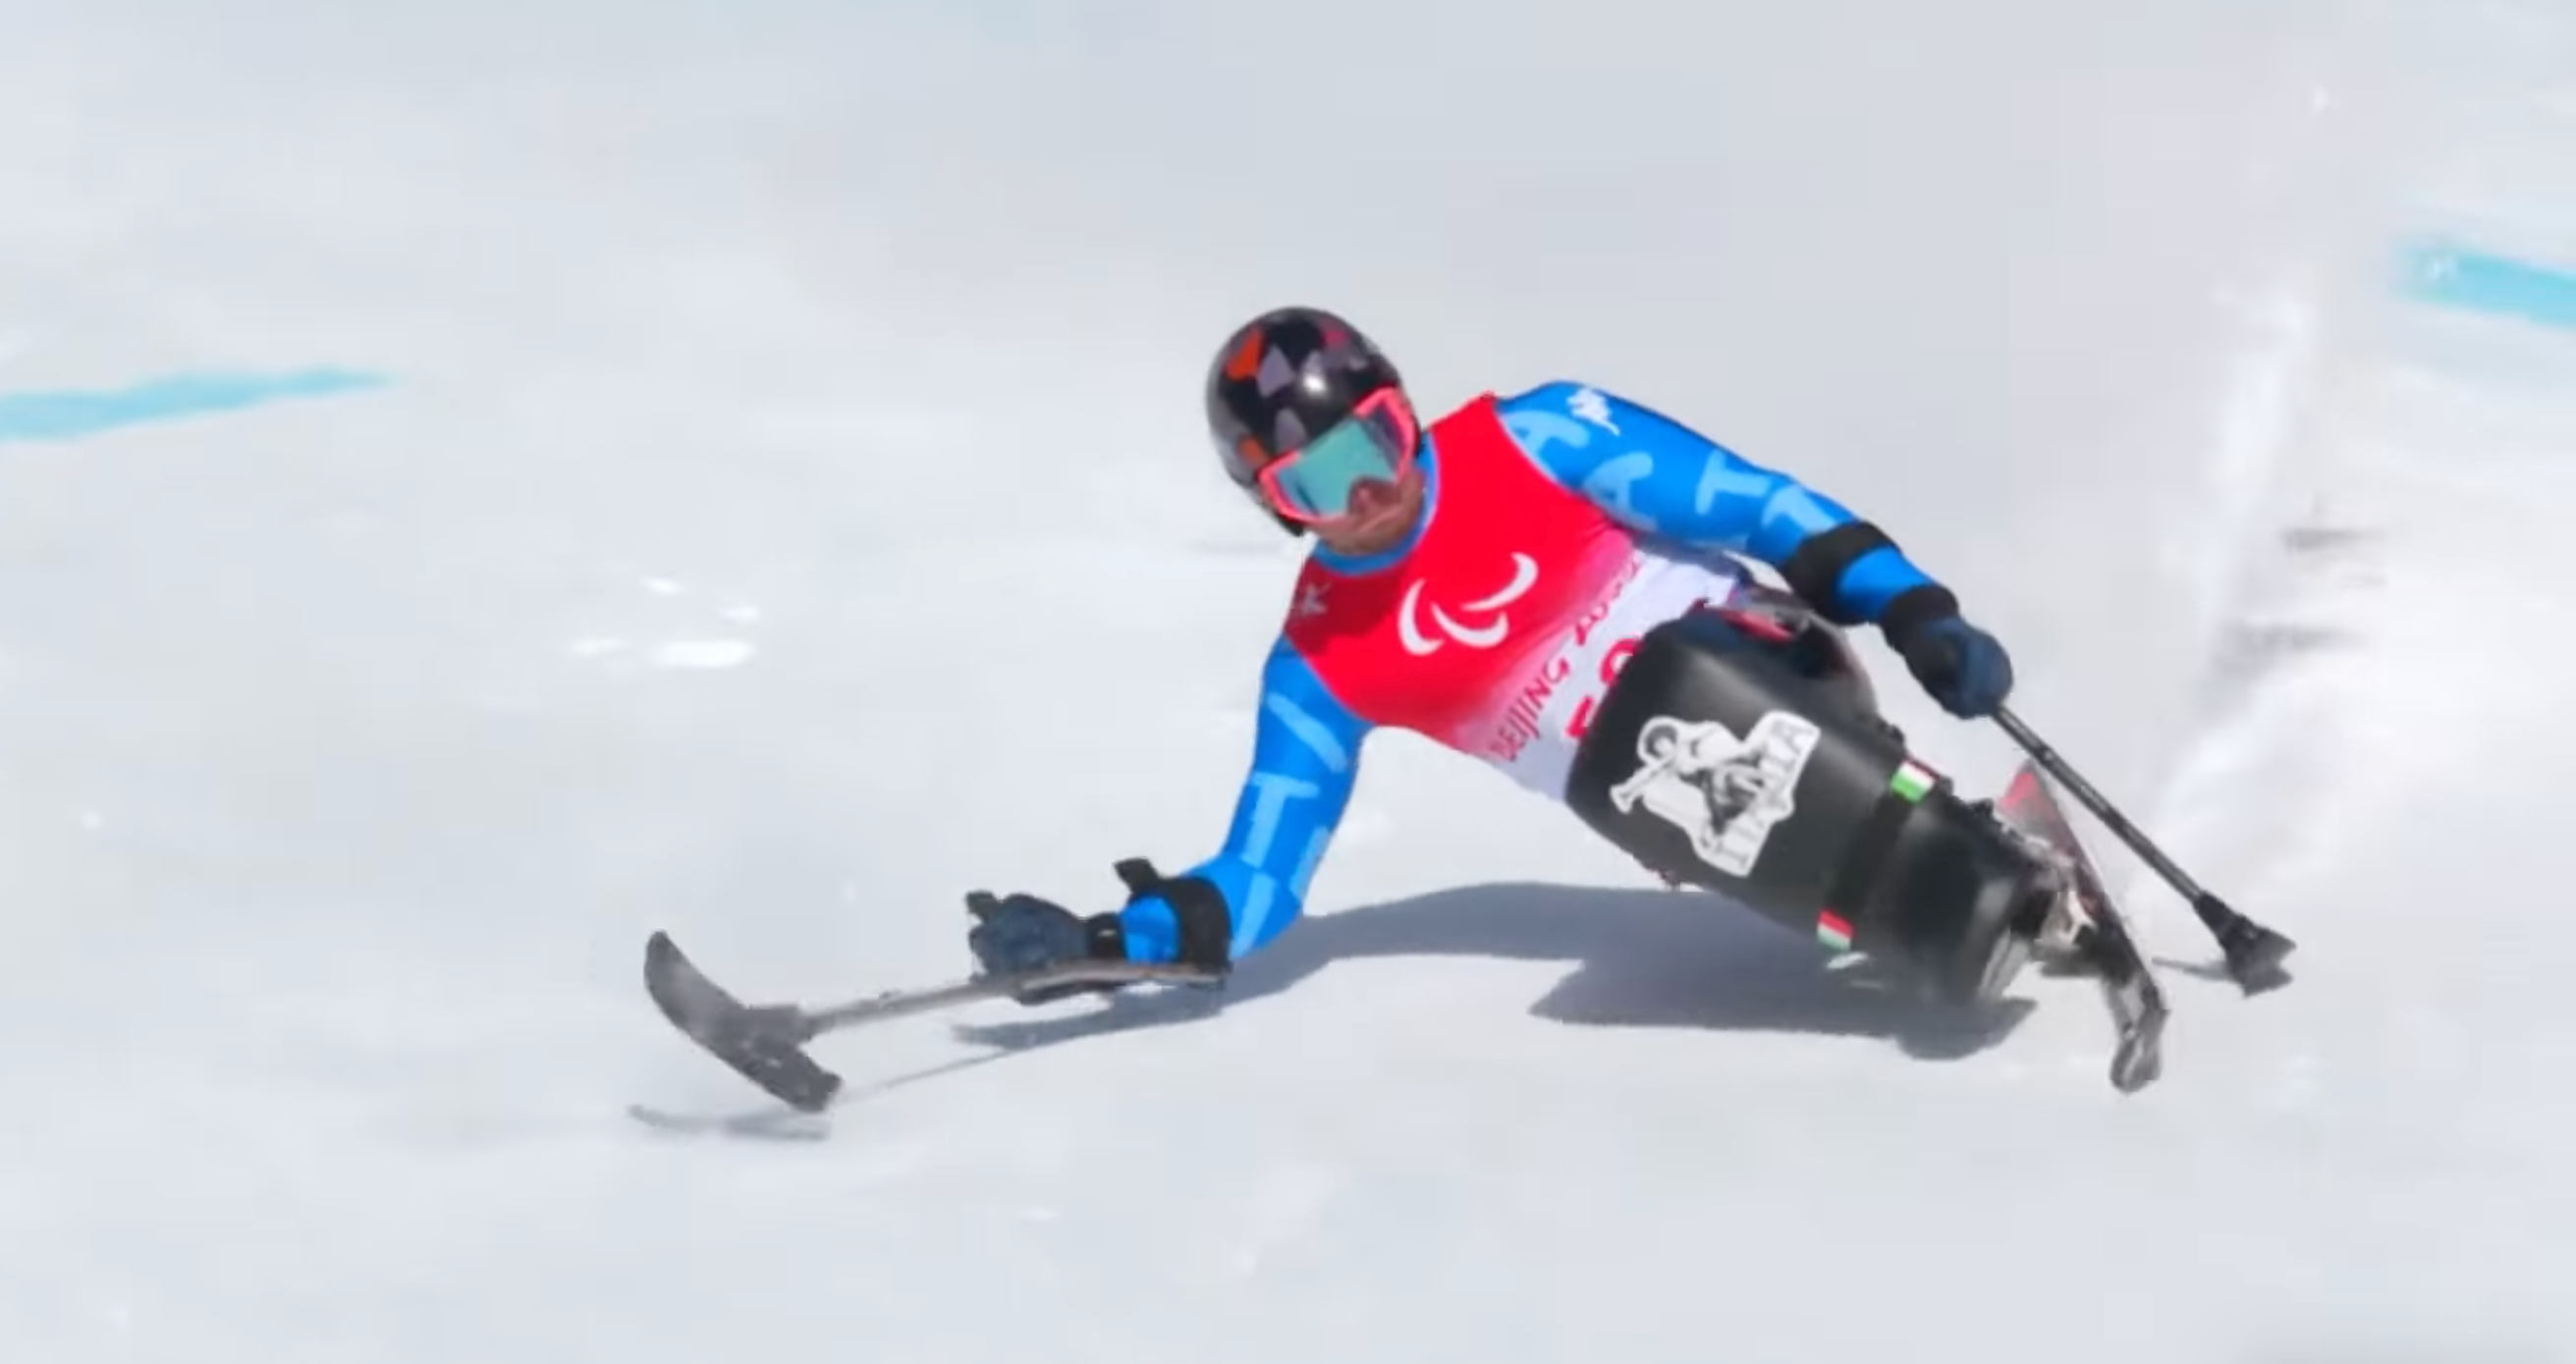 Rene de Silvestro completes a run in the Para Alpine Skiing competition.